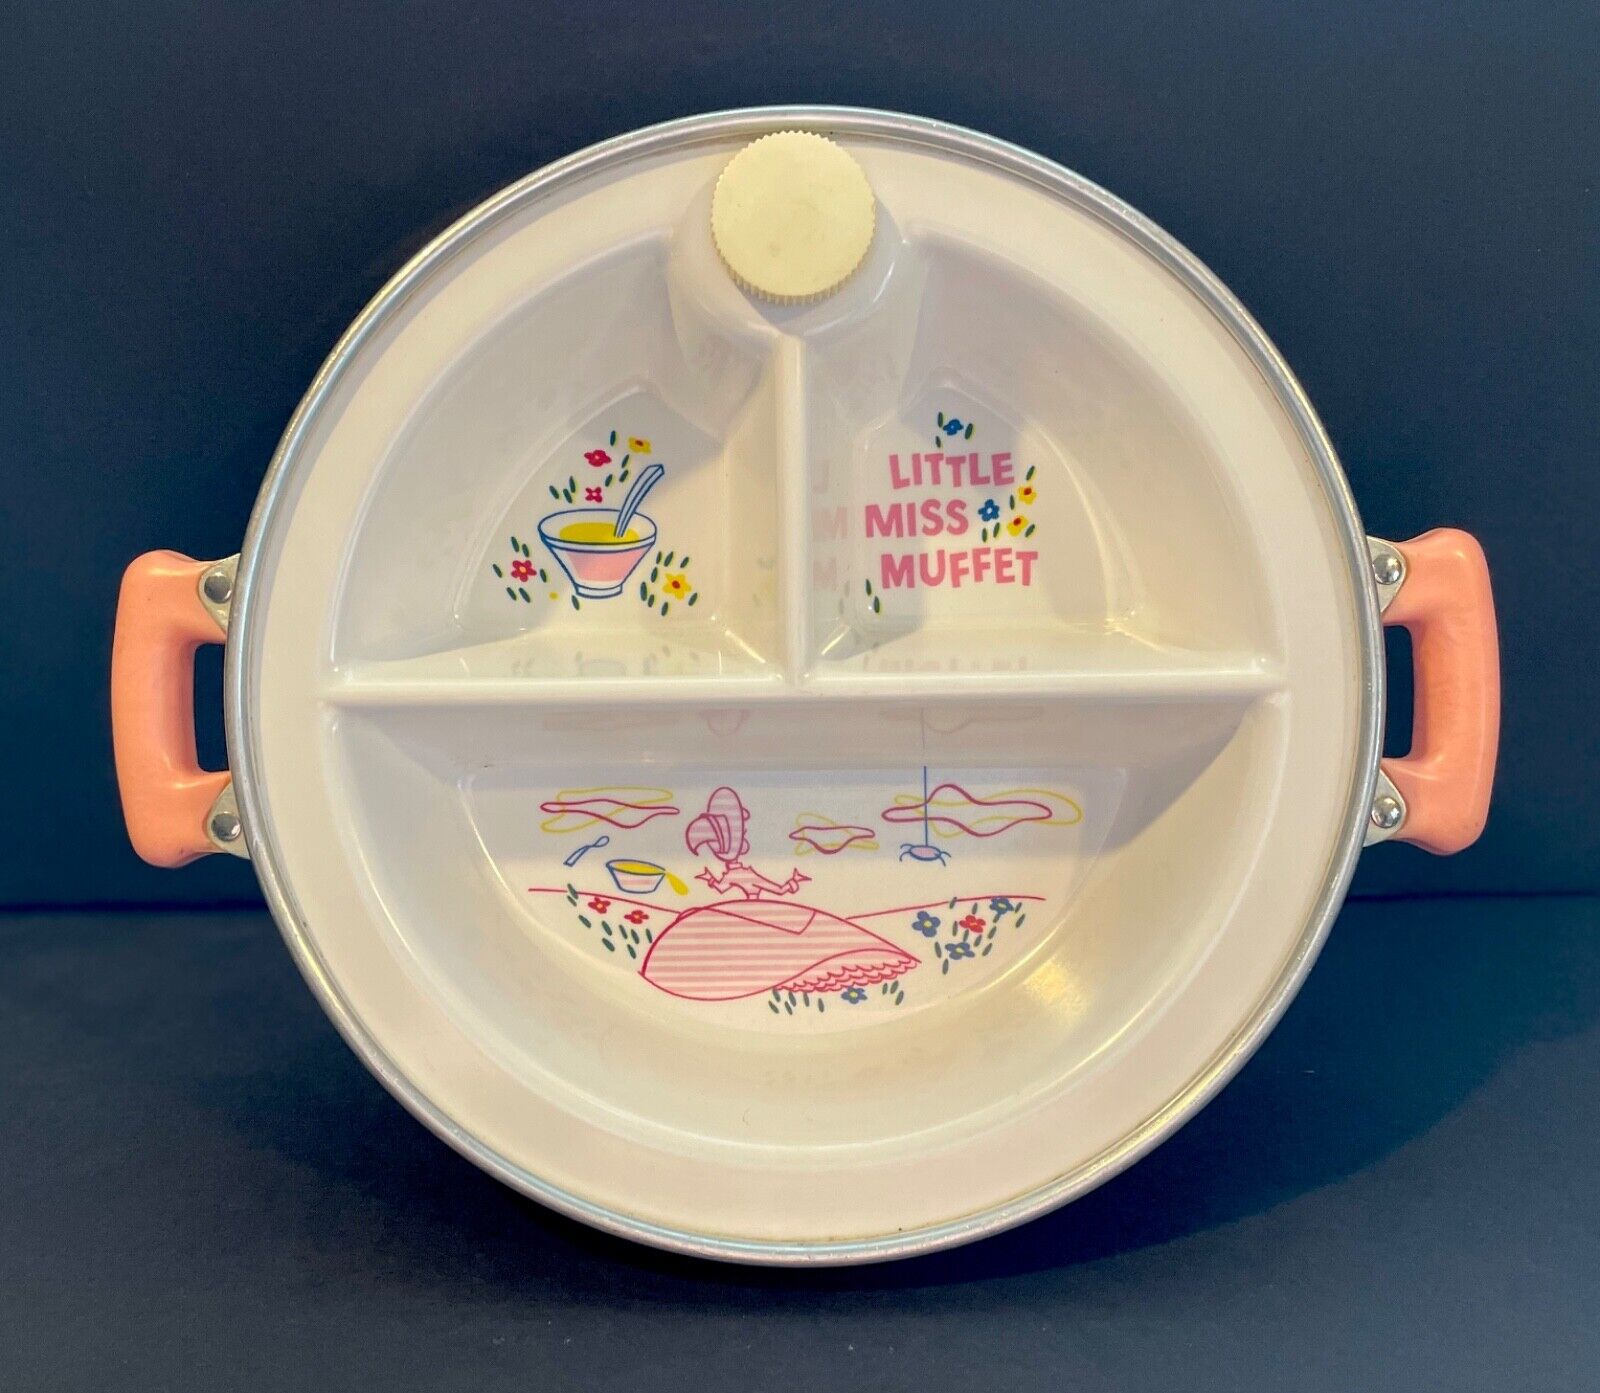 Vintage 1950s Baby Food Warming Dish Little Miss Muffet Excello Aluminum Base